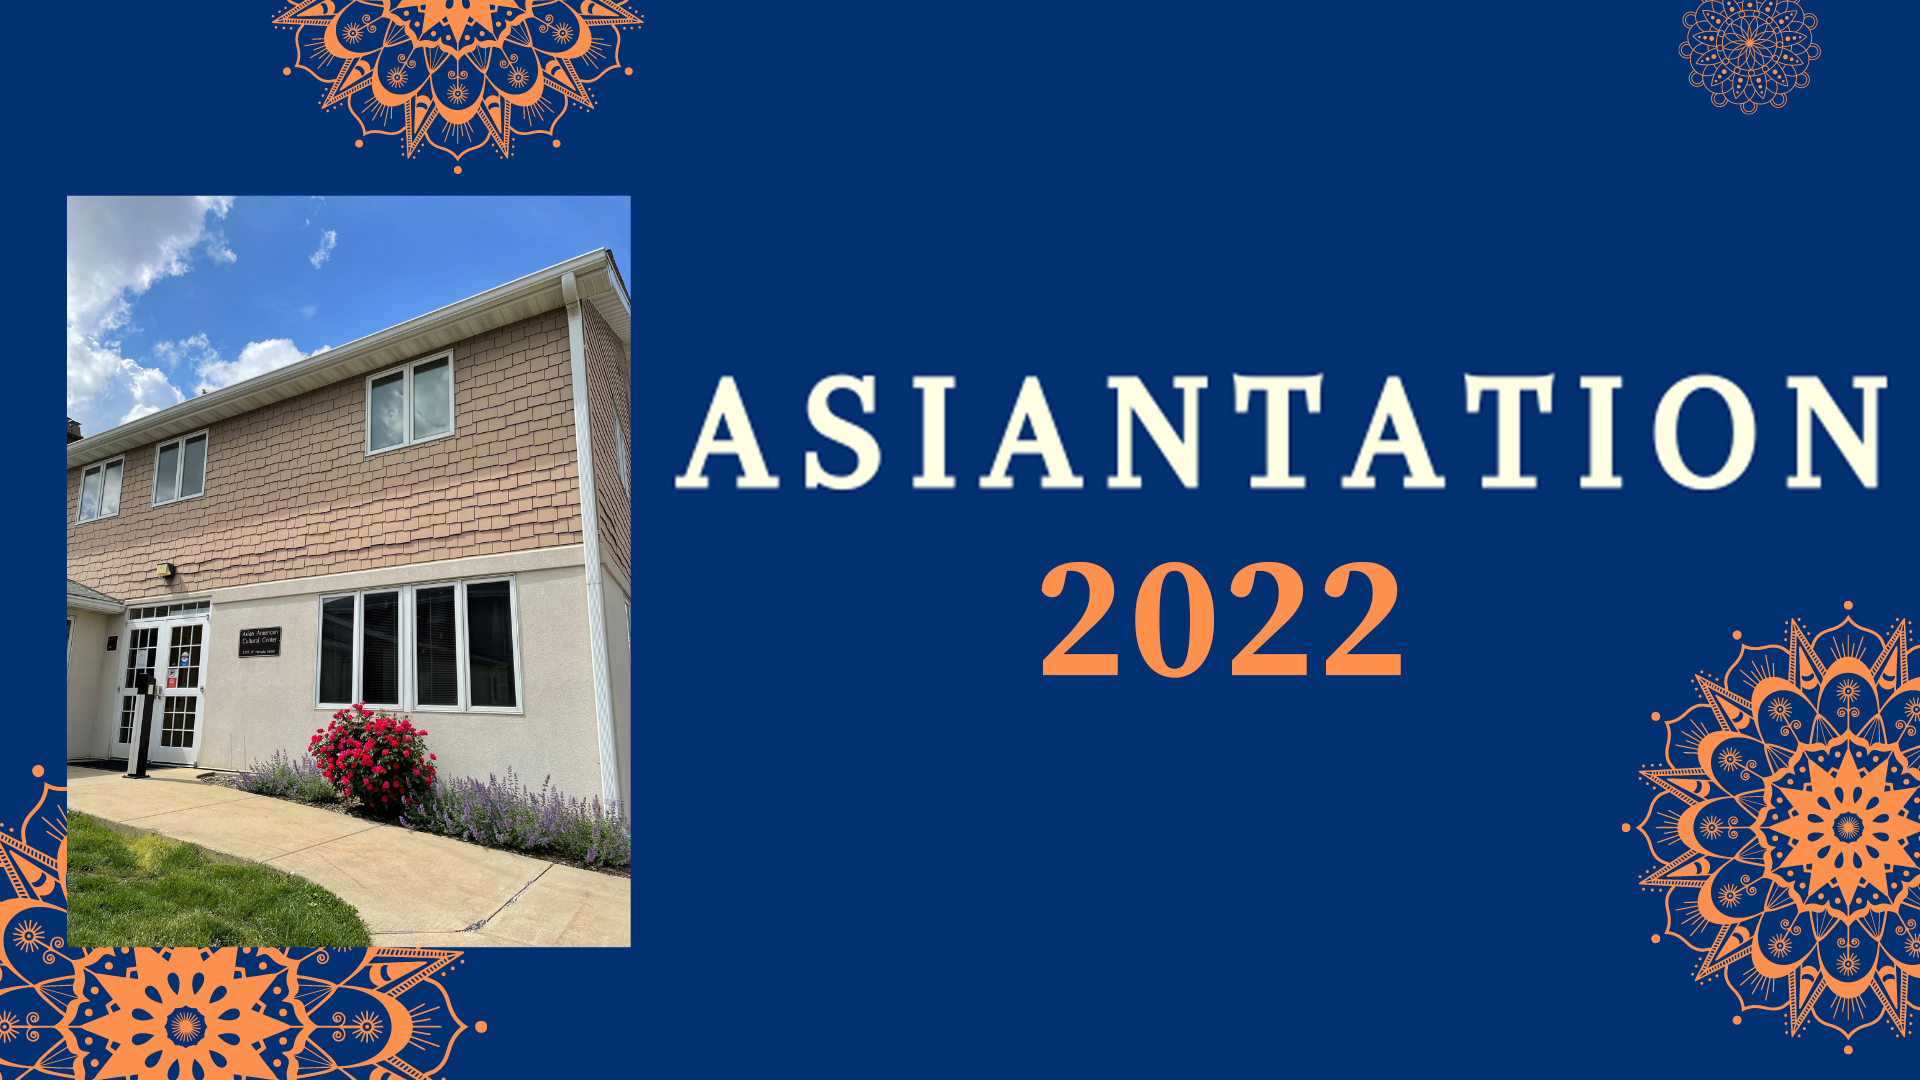 Asiantation 2022 header on blue background with photo of AACC facility entrance and orange patterns